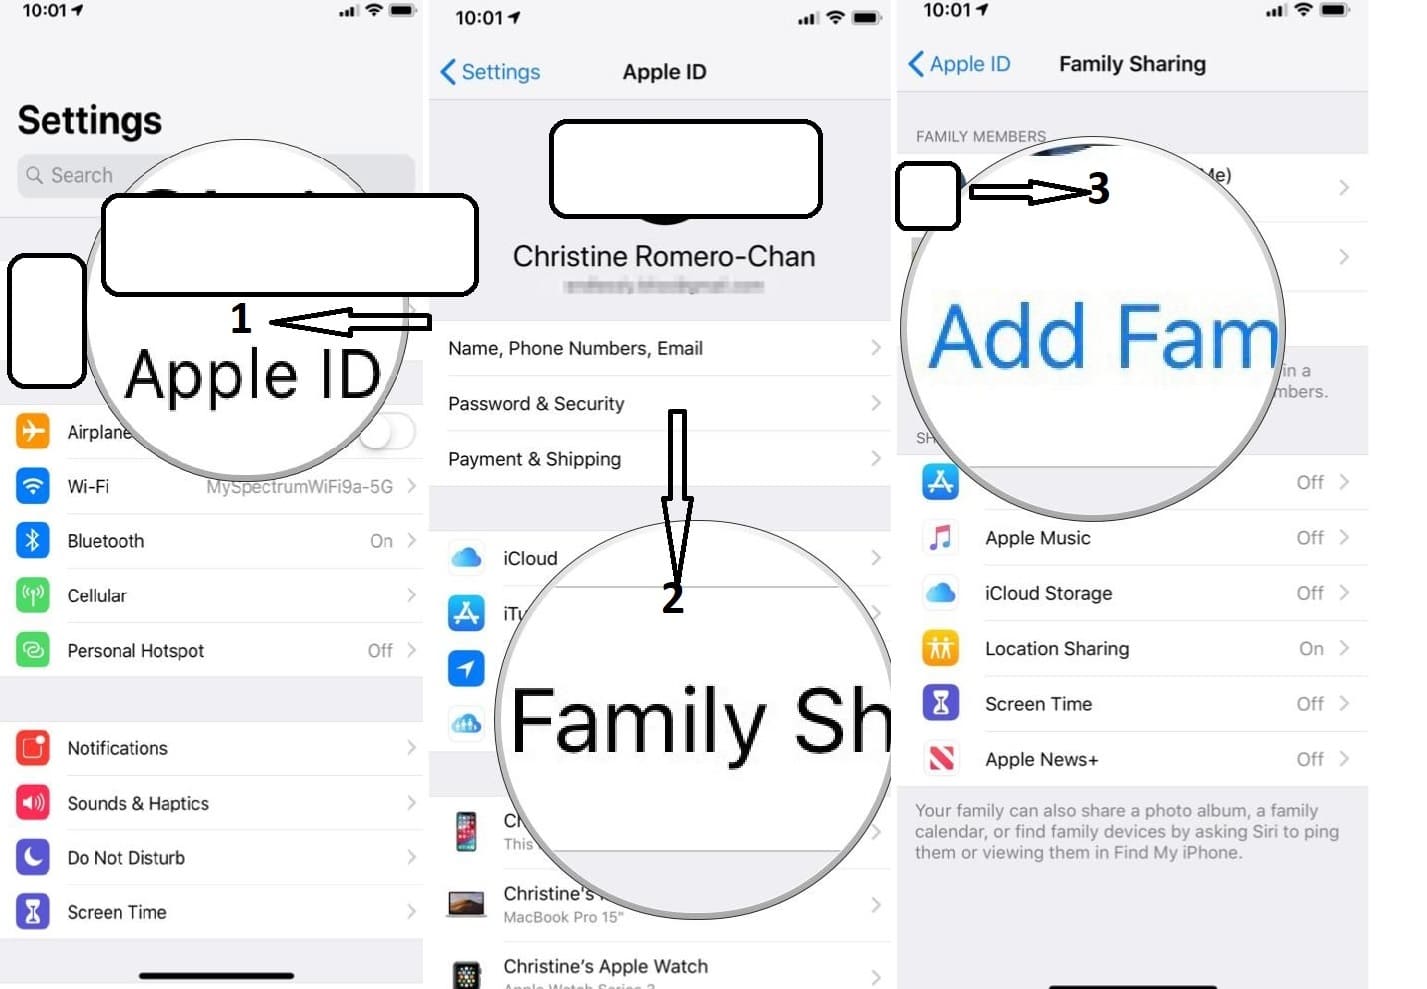 Open the Settings, Select Family Sharing